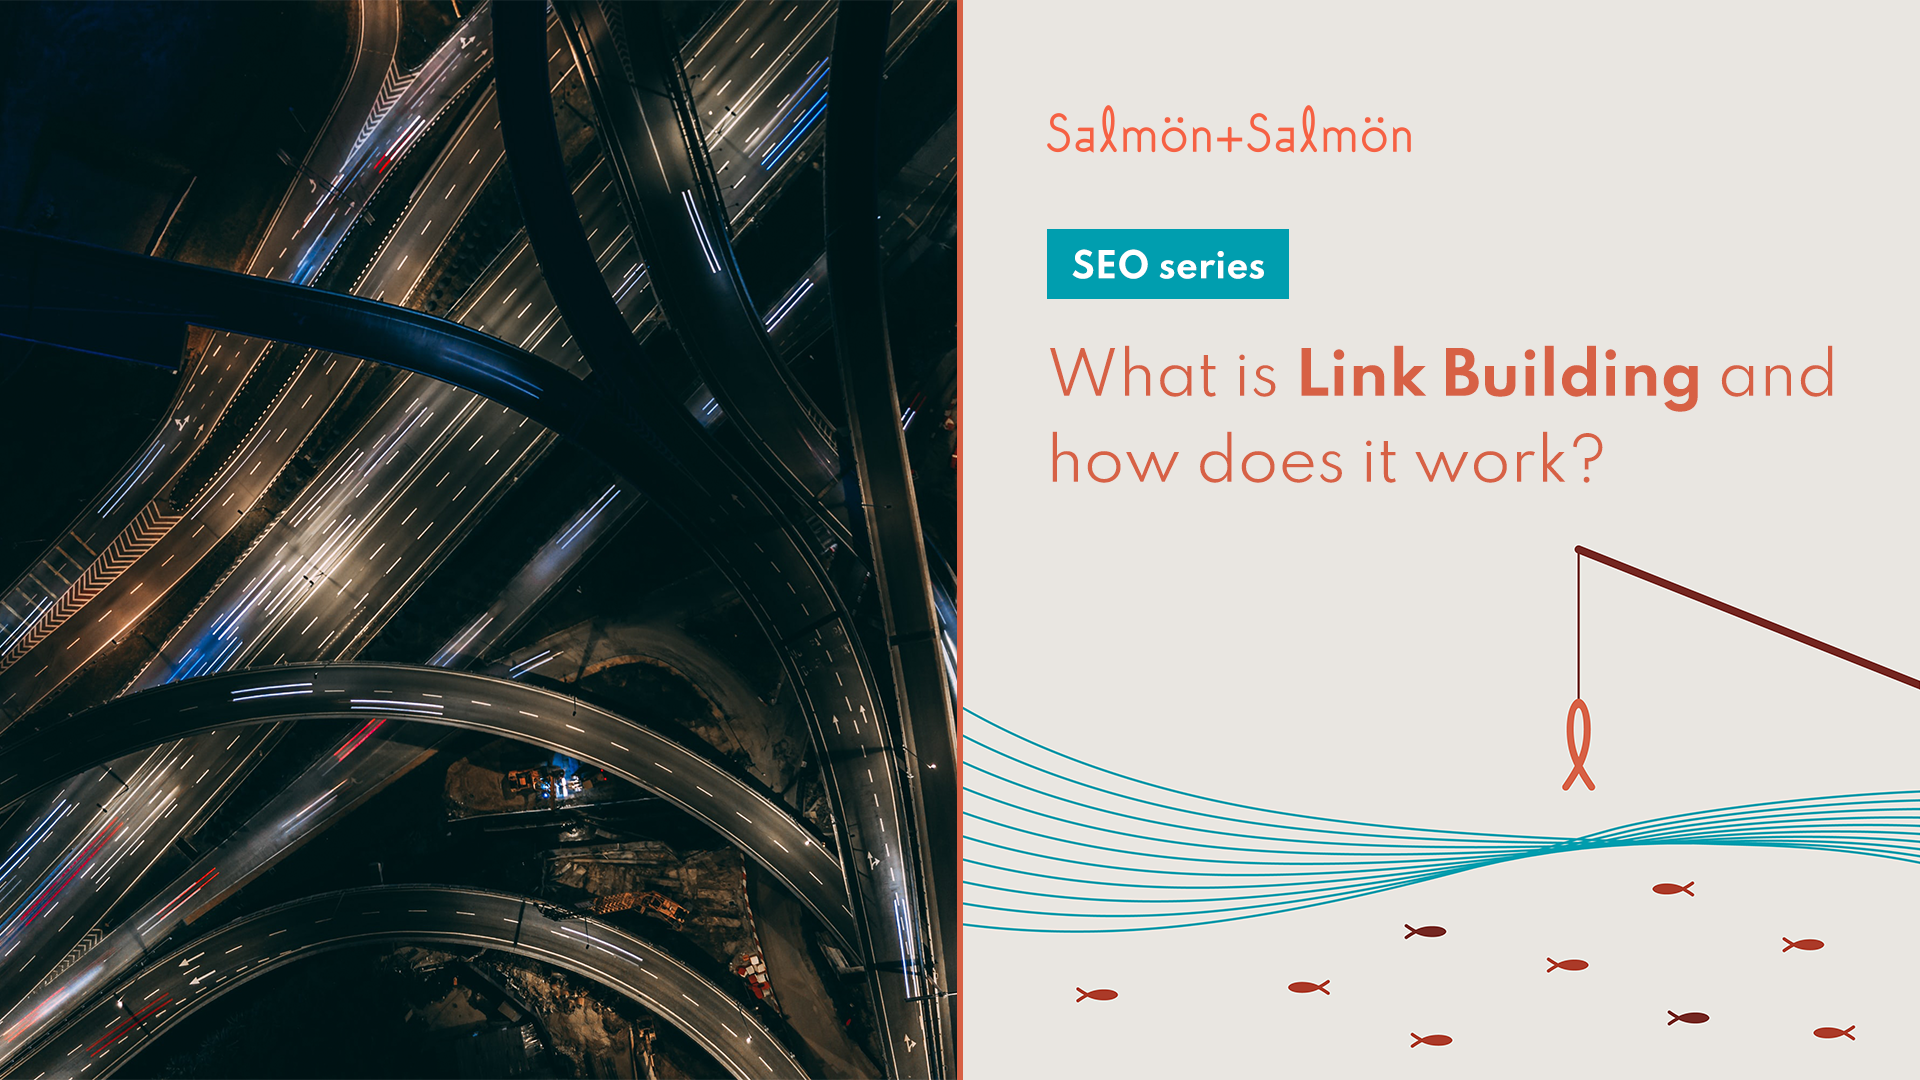 What is Link Building and how does it work